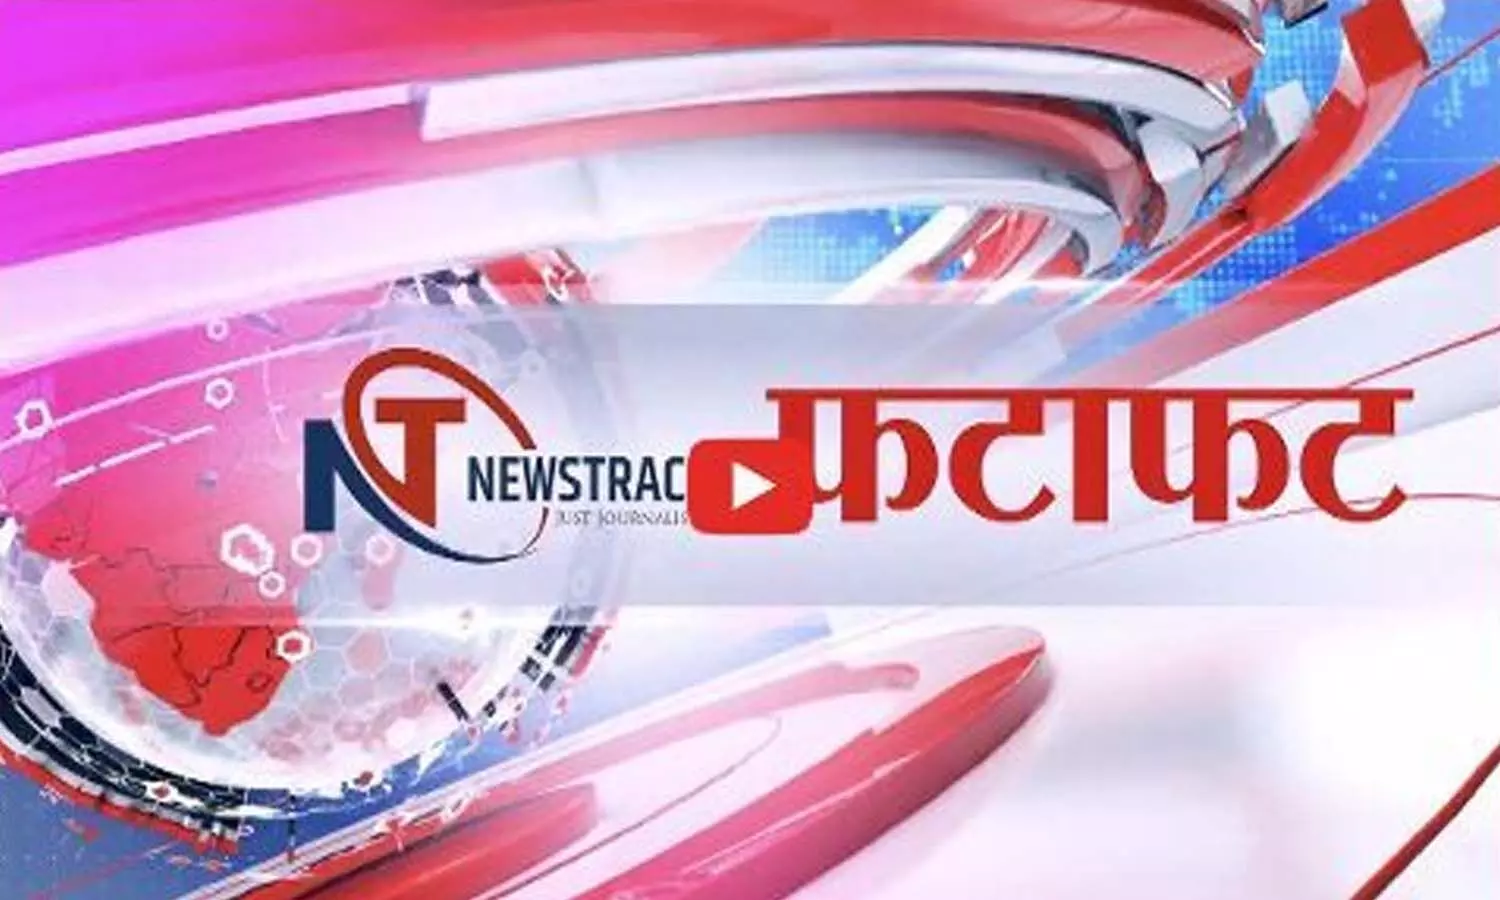 Latest News Todays: Take a look at todays events, stay tuned with Newstrack for the latest news